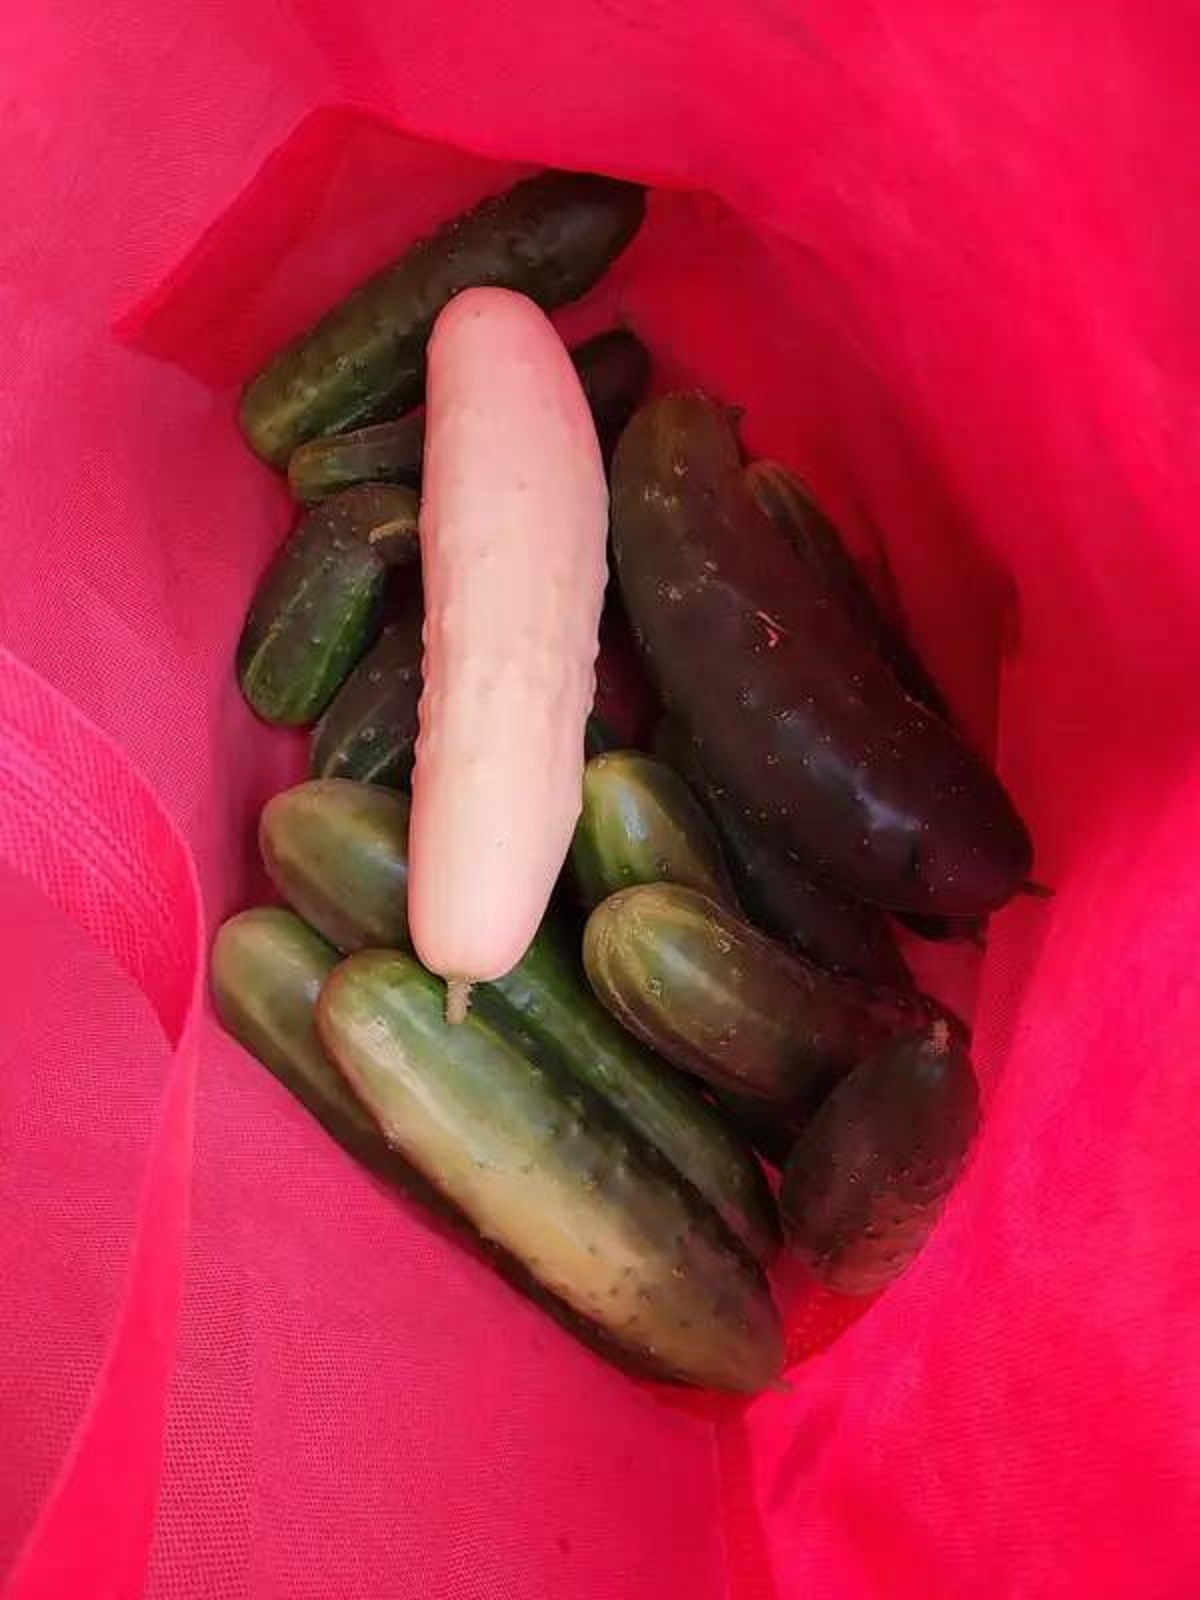 White cucumbers exist: